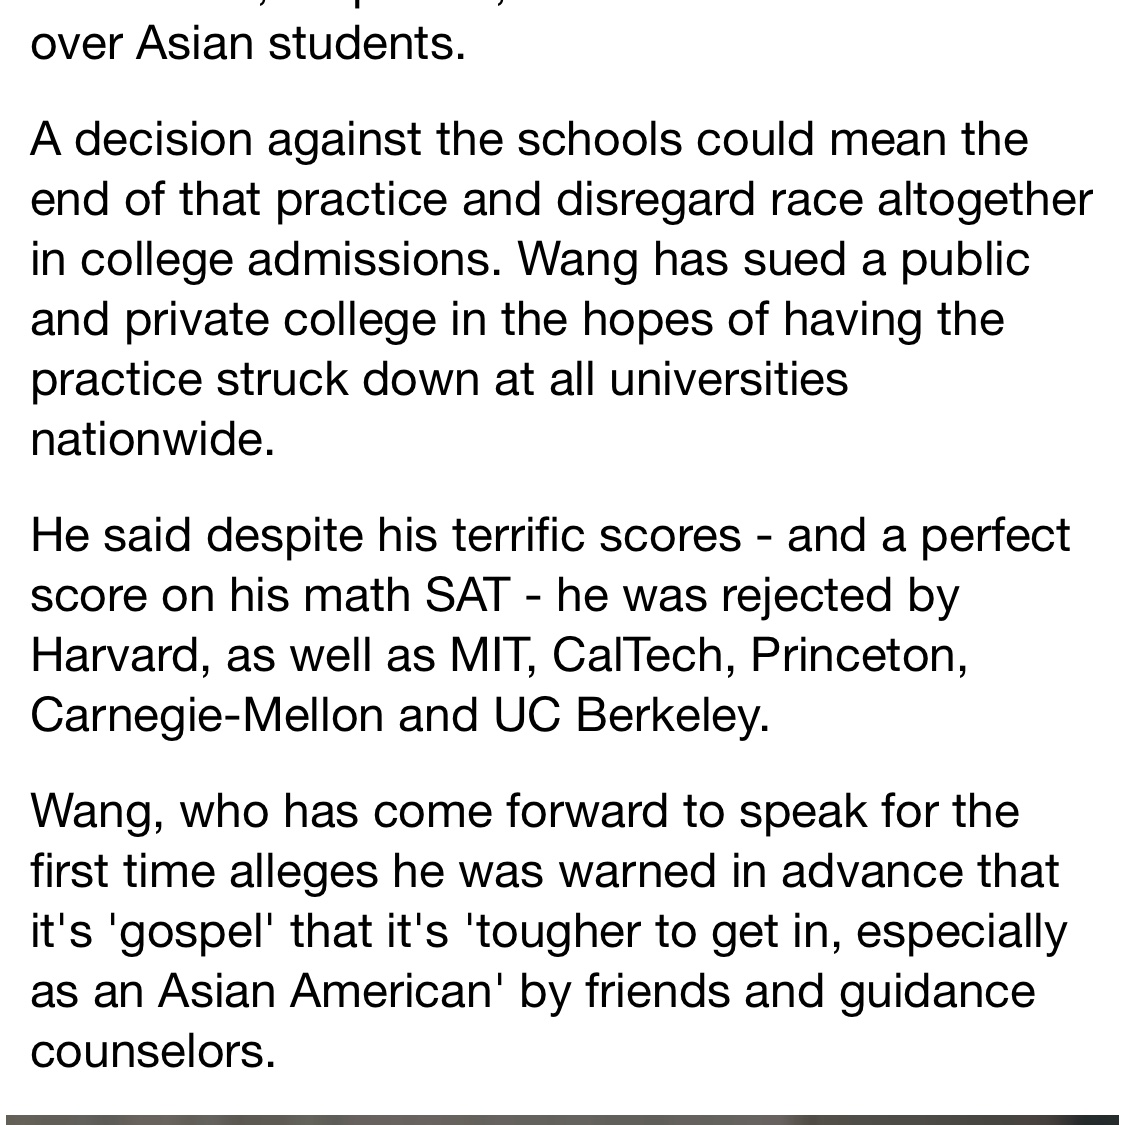 he also got rejected by UC Berkeley which doesn’t use race as a factor in admissions … maybe it’s just a skill issue idk